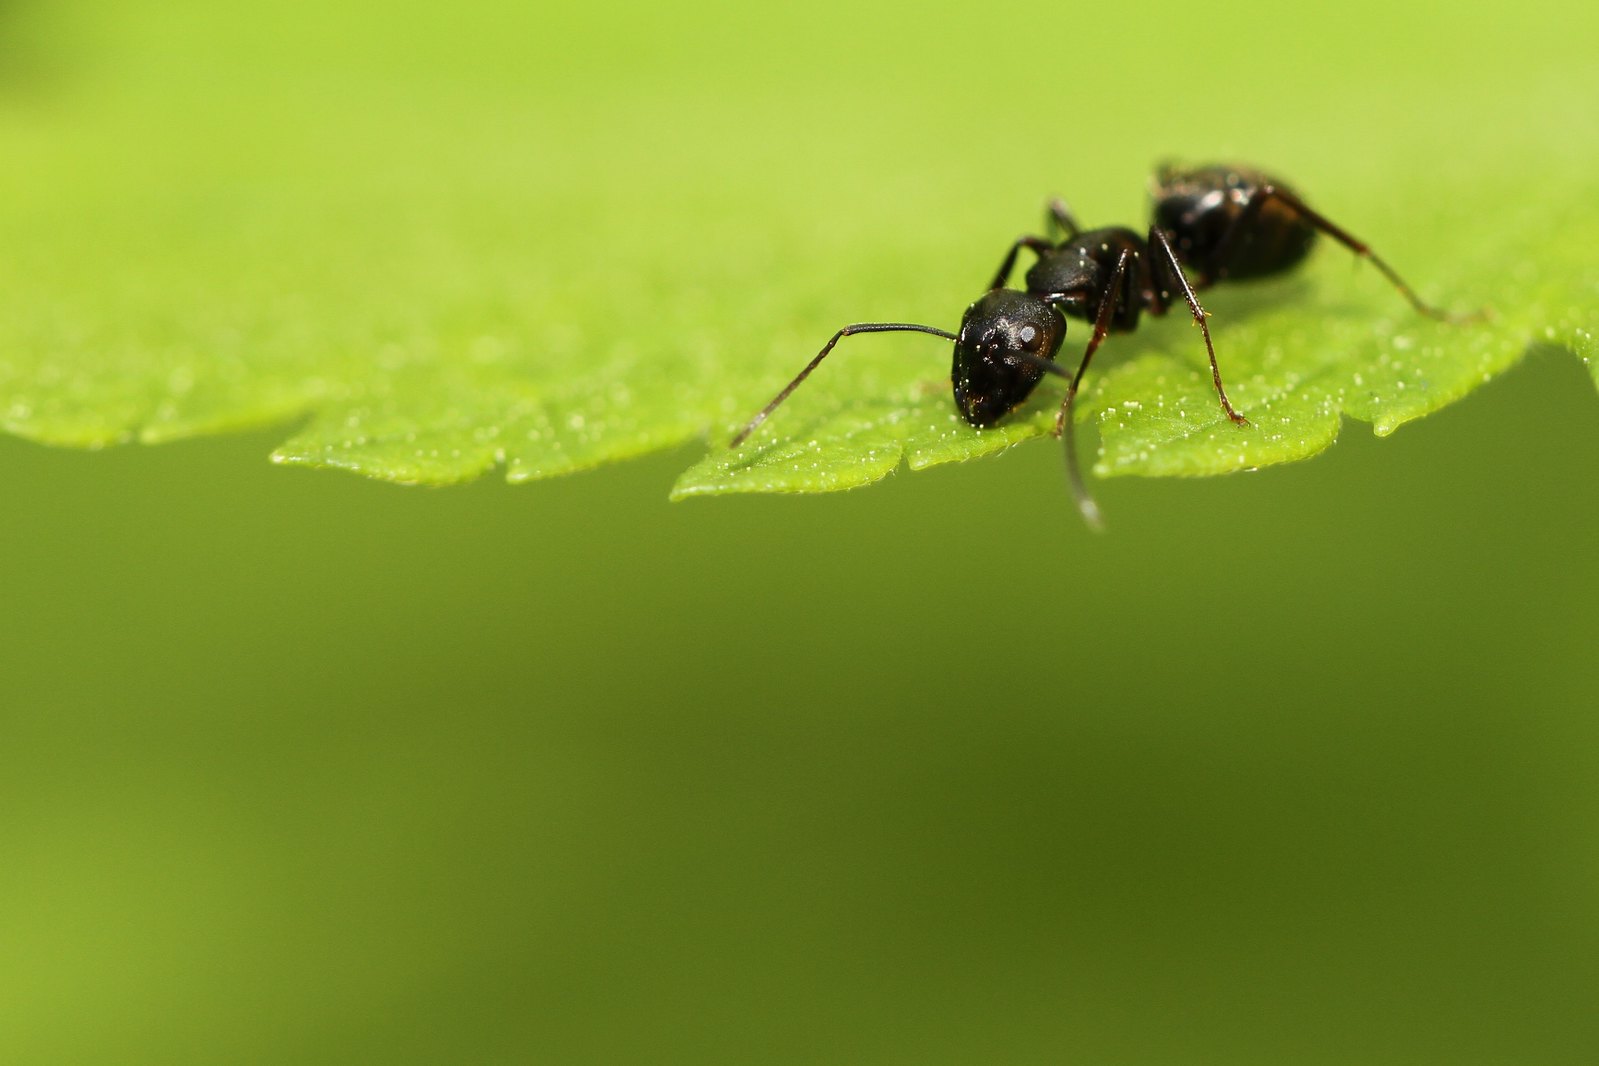 A black ant peering over a leaf